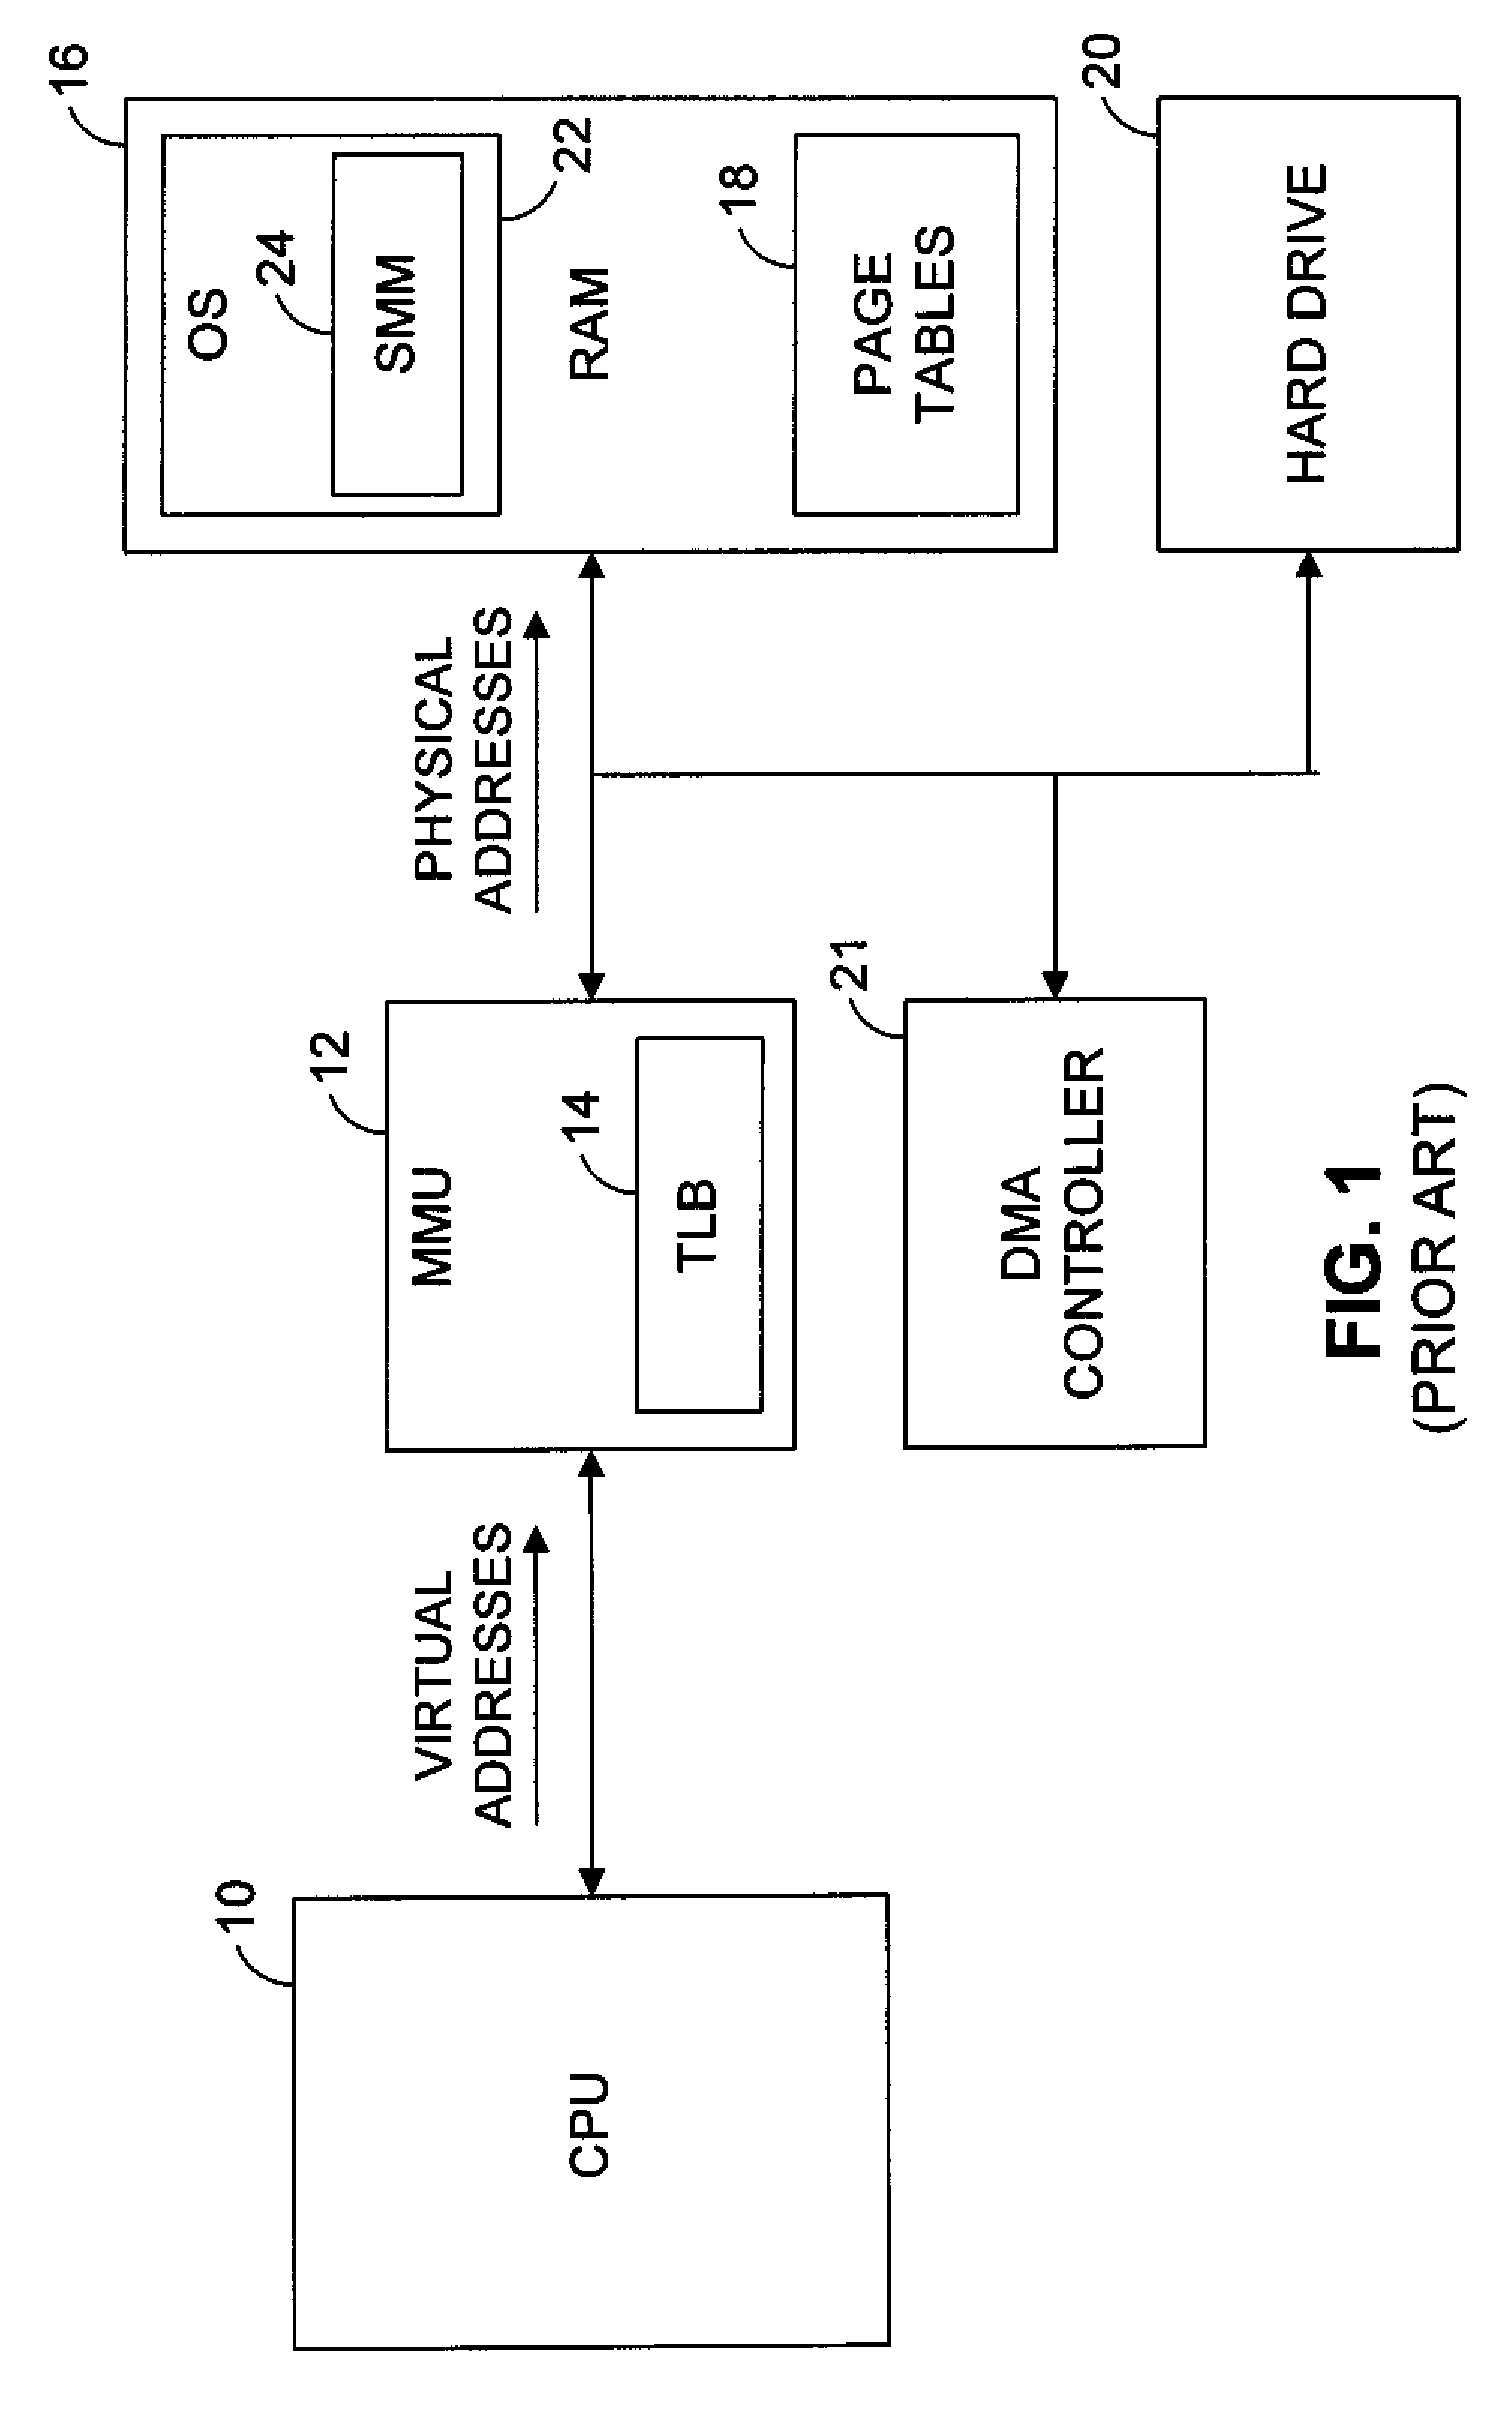 Maintaining address translations during the software-based processing of instructions